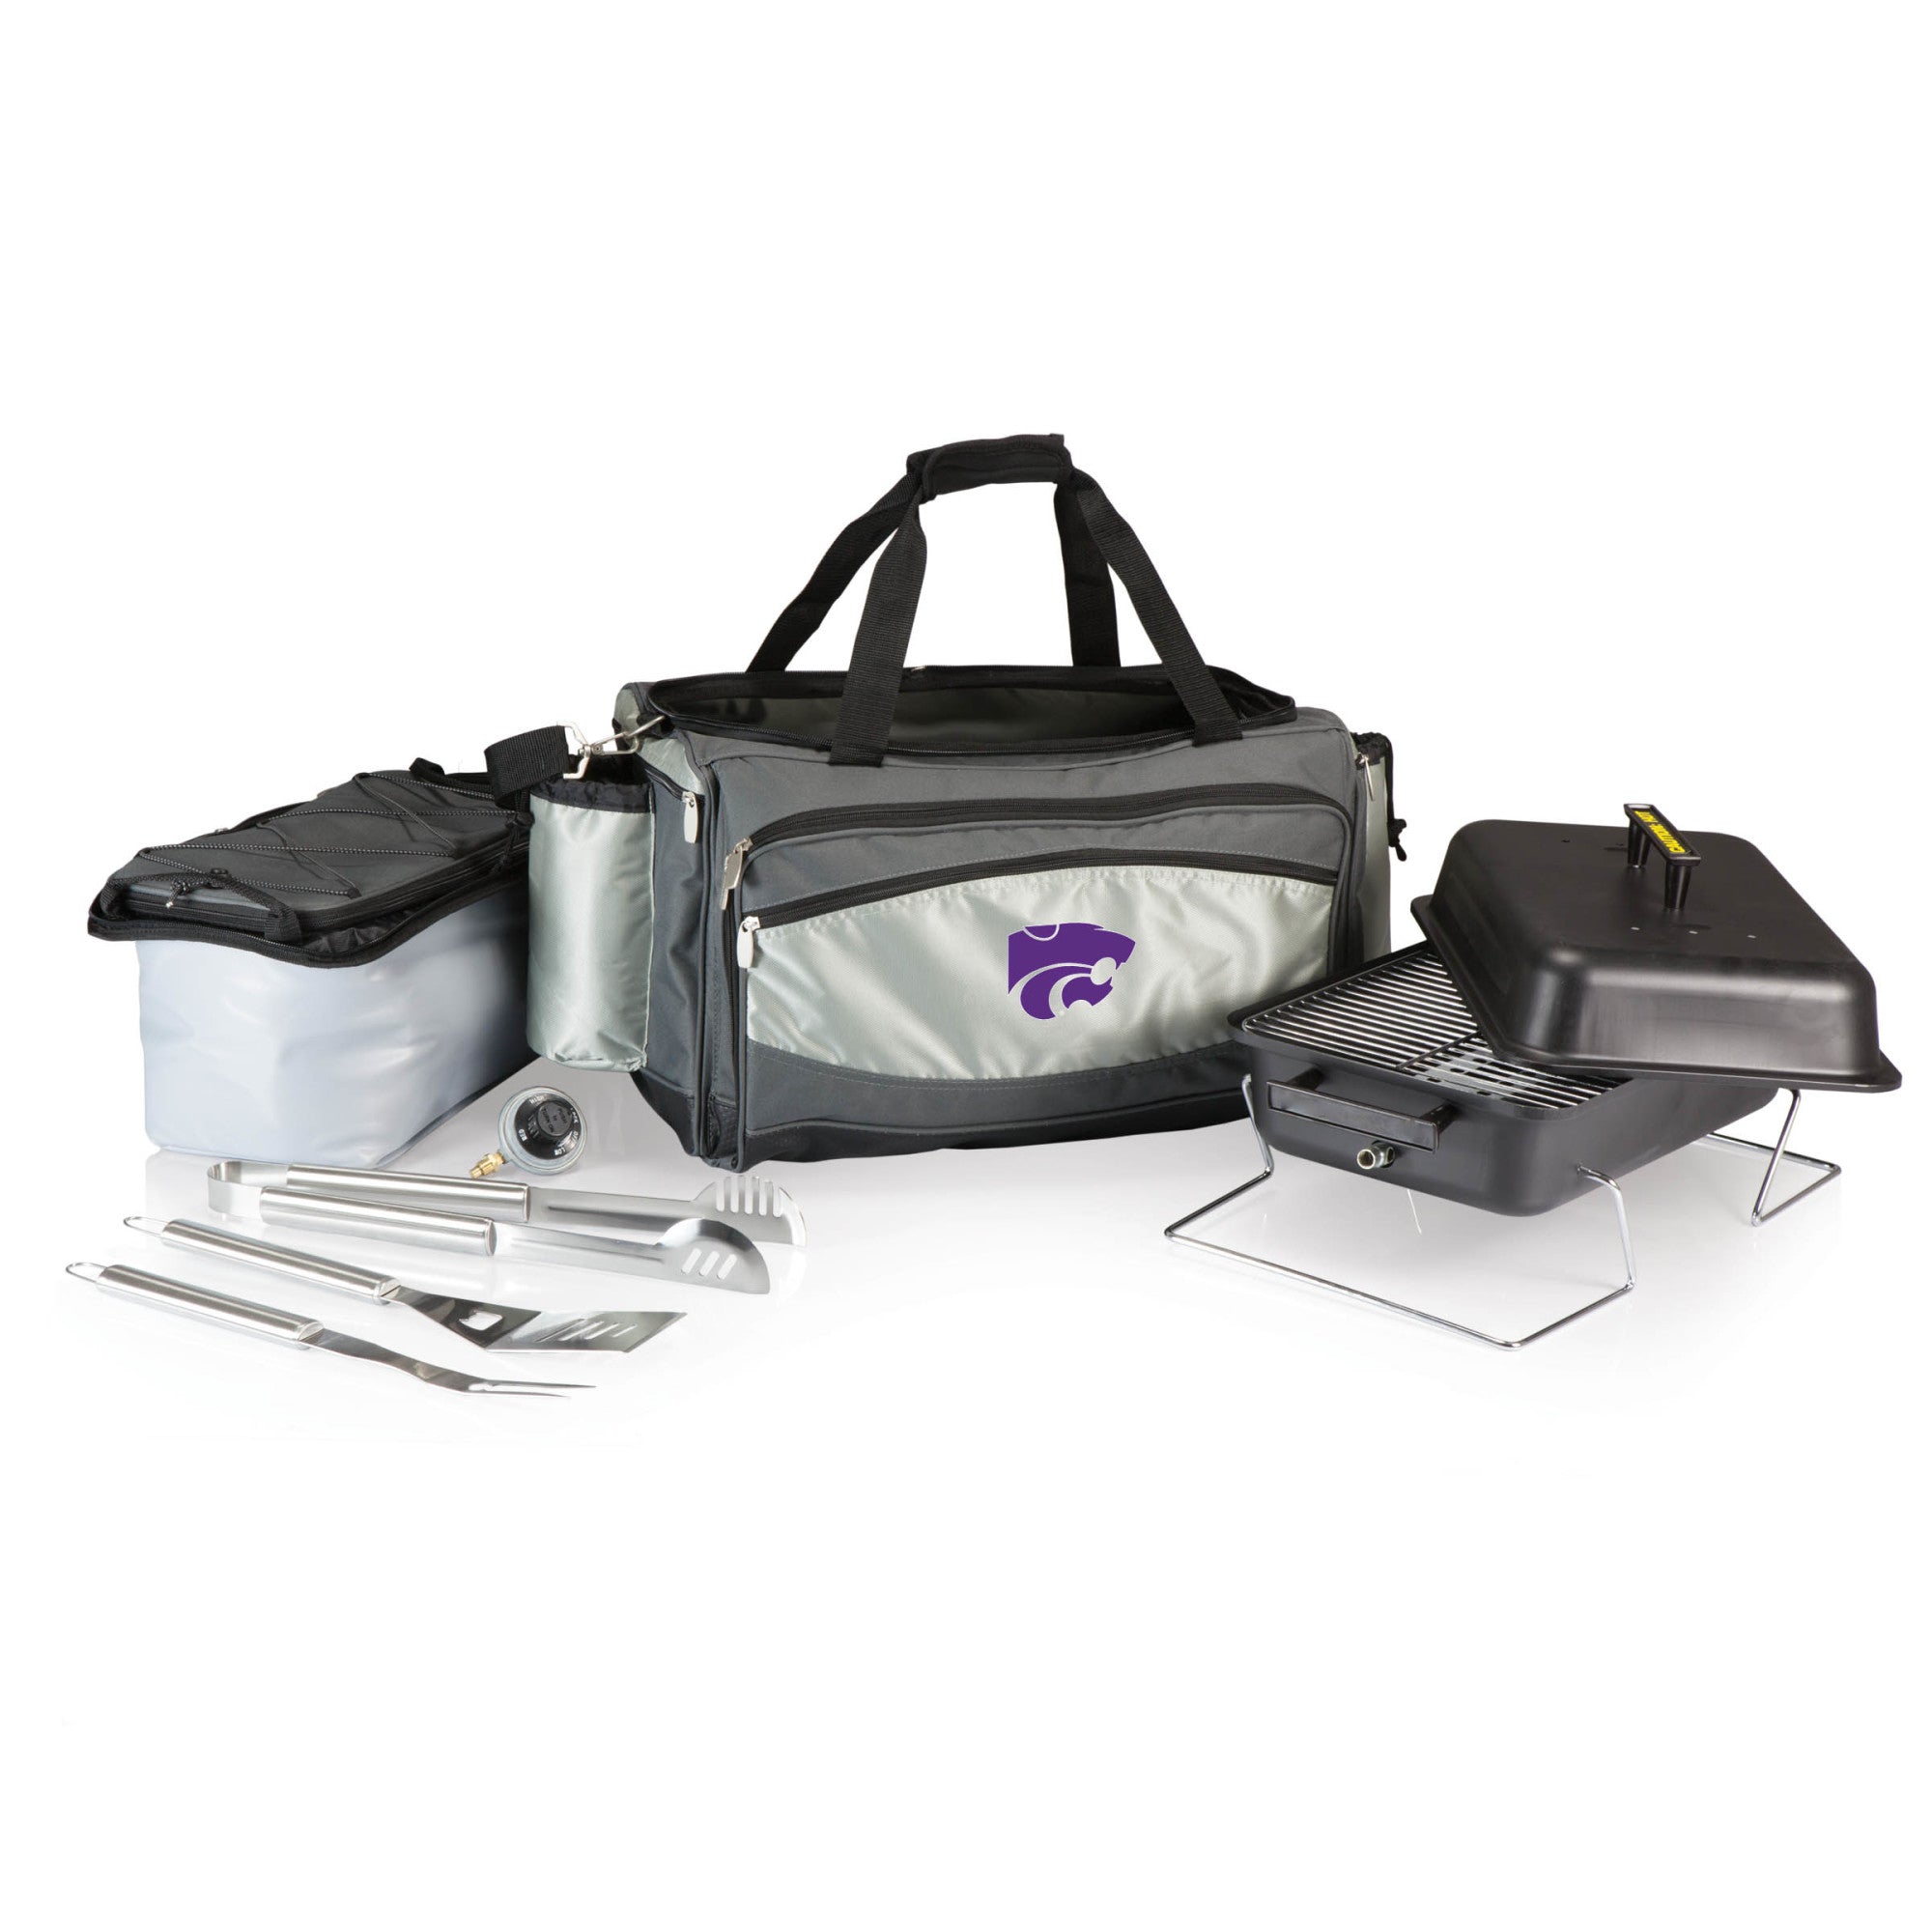 Kansas State Wildcats - Vulcan Portable Propane Grill & Cooler Tote